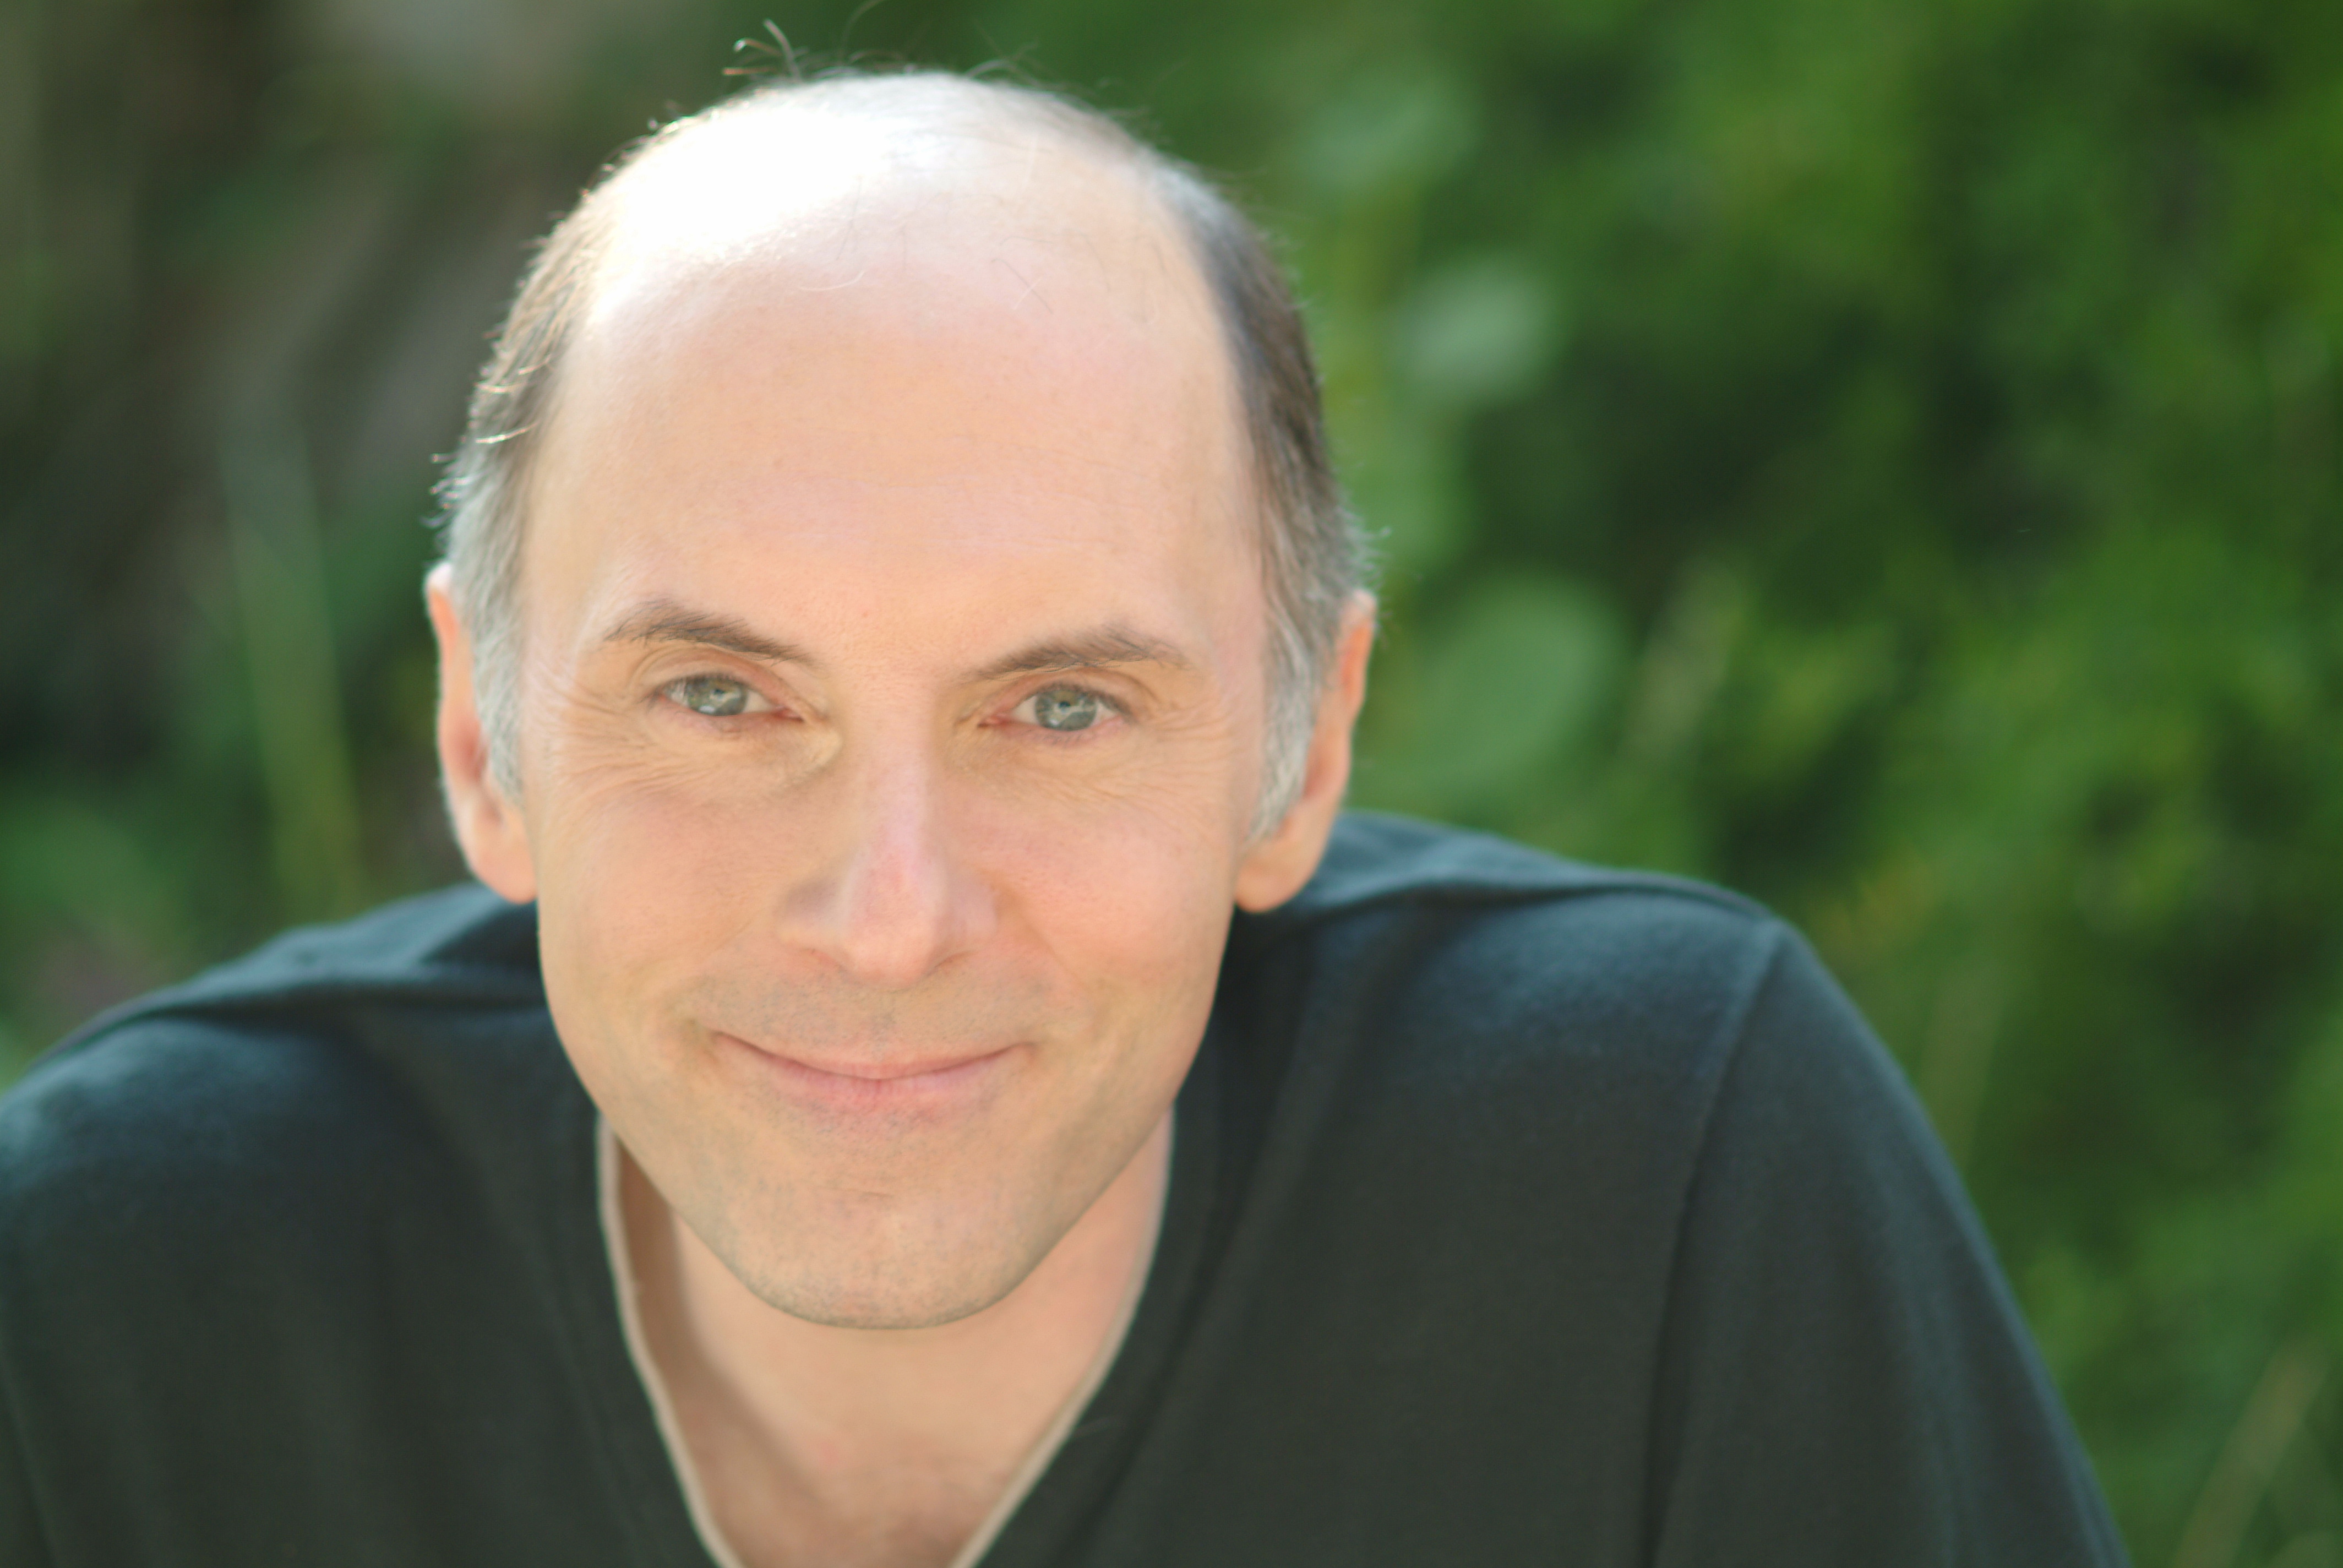 Dan Castellaneta, playwright Dan Castellaneta, playwright & voice of Homer Simpson, in town for Tride Playwrights Fest